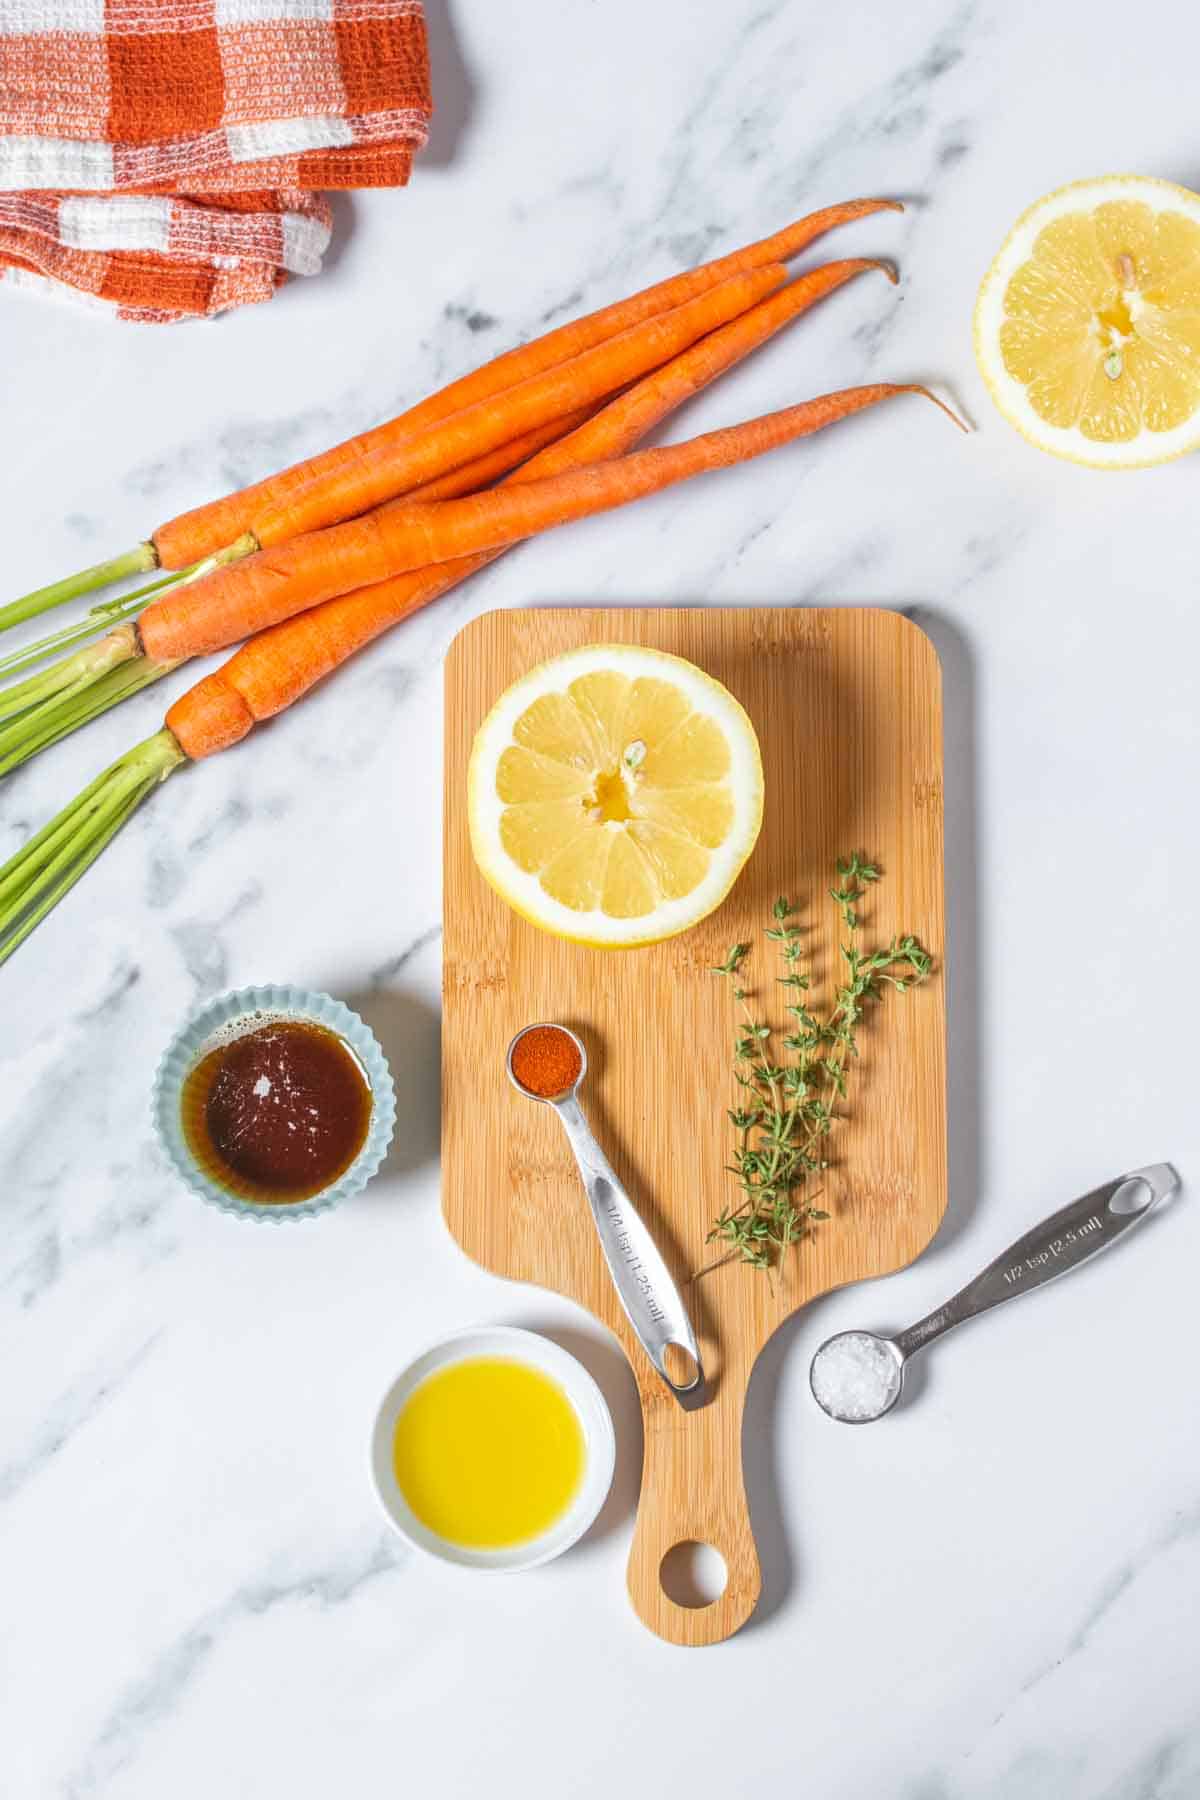 A wooden cutting board on a marble surface and thyme, seasonings, maple syrup, carrots, lemon and olive oil in bowls on them.